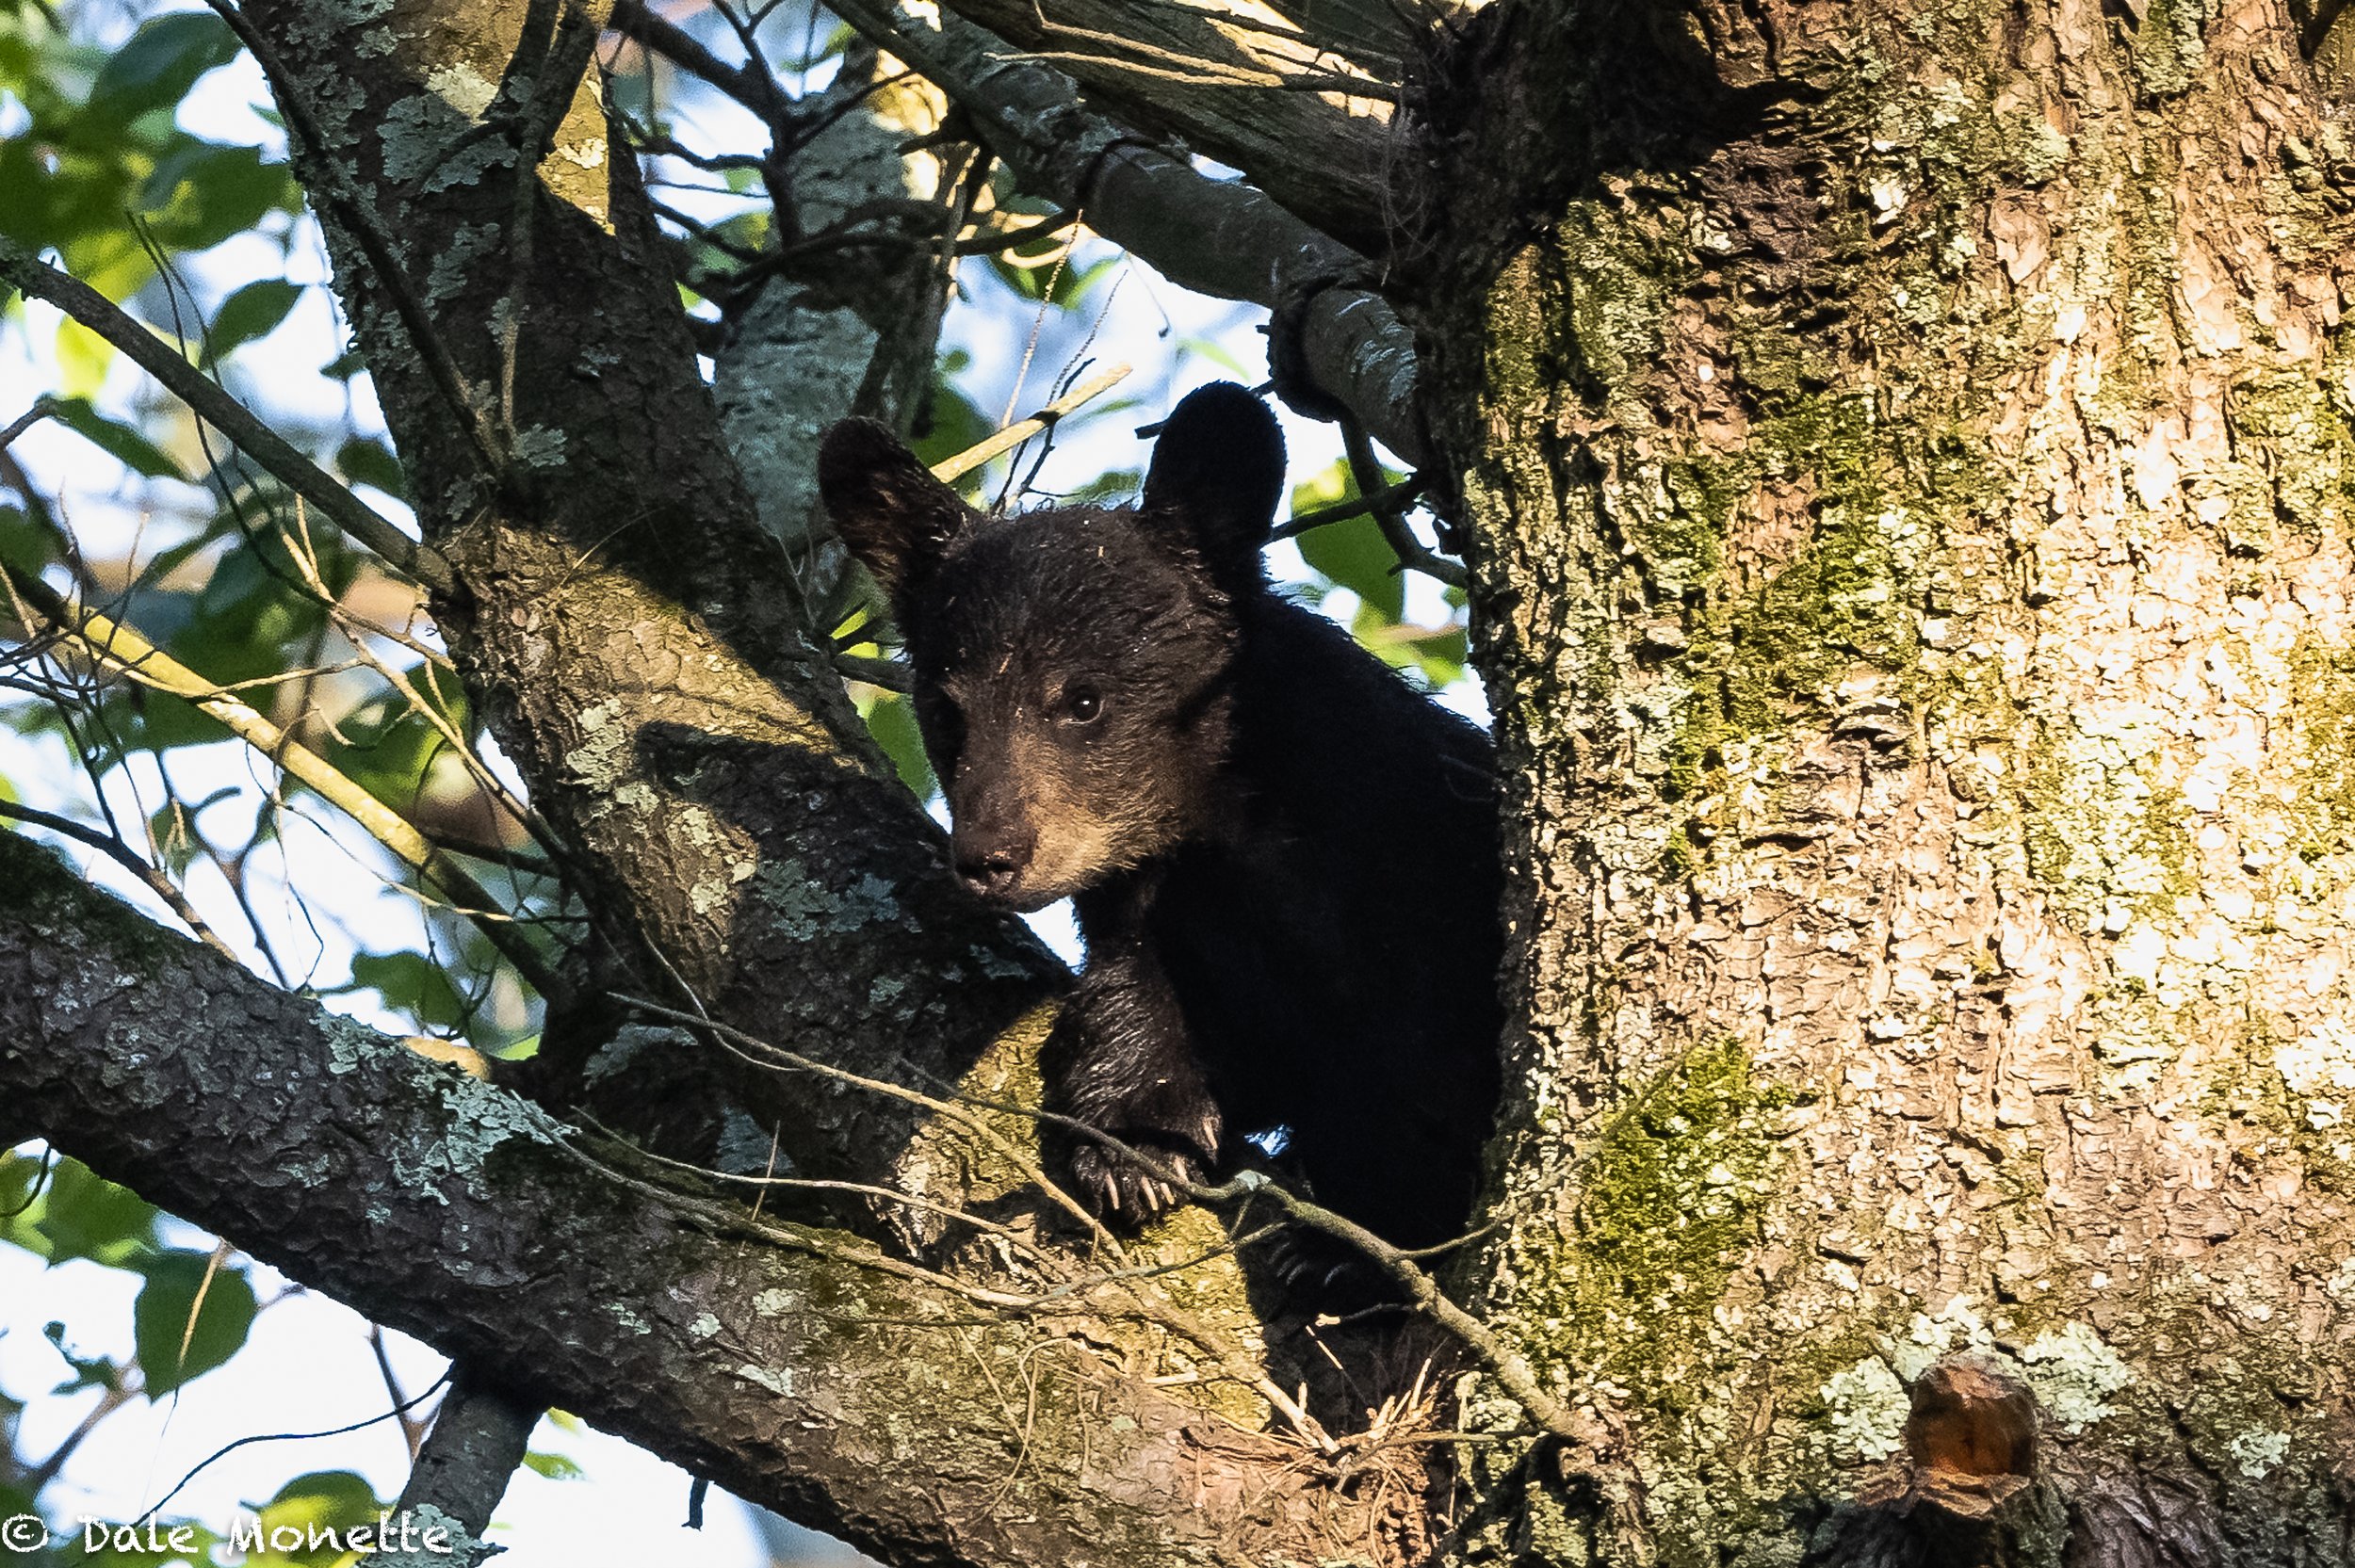   I spotted these 2 cubs,( or they spotted me,)  that were up in a tree about 40 feet high.  I was about 100 yards away and I took a few photos and then promptly left. On my way out in about an hour, they were gone. Here’s the smallest of the two.  